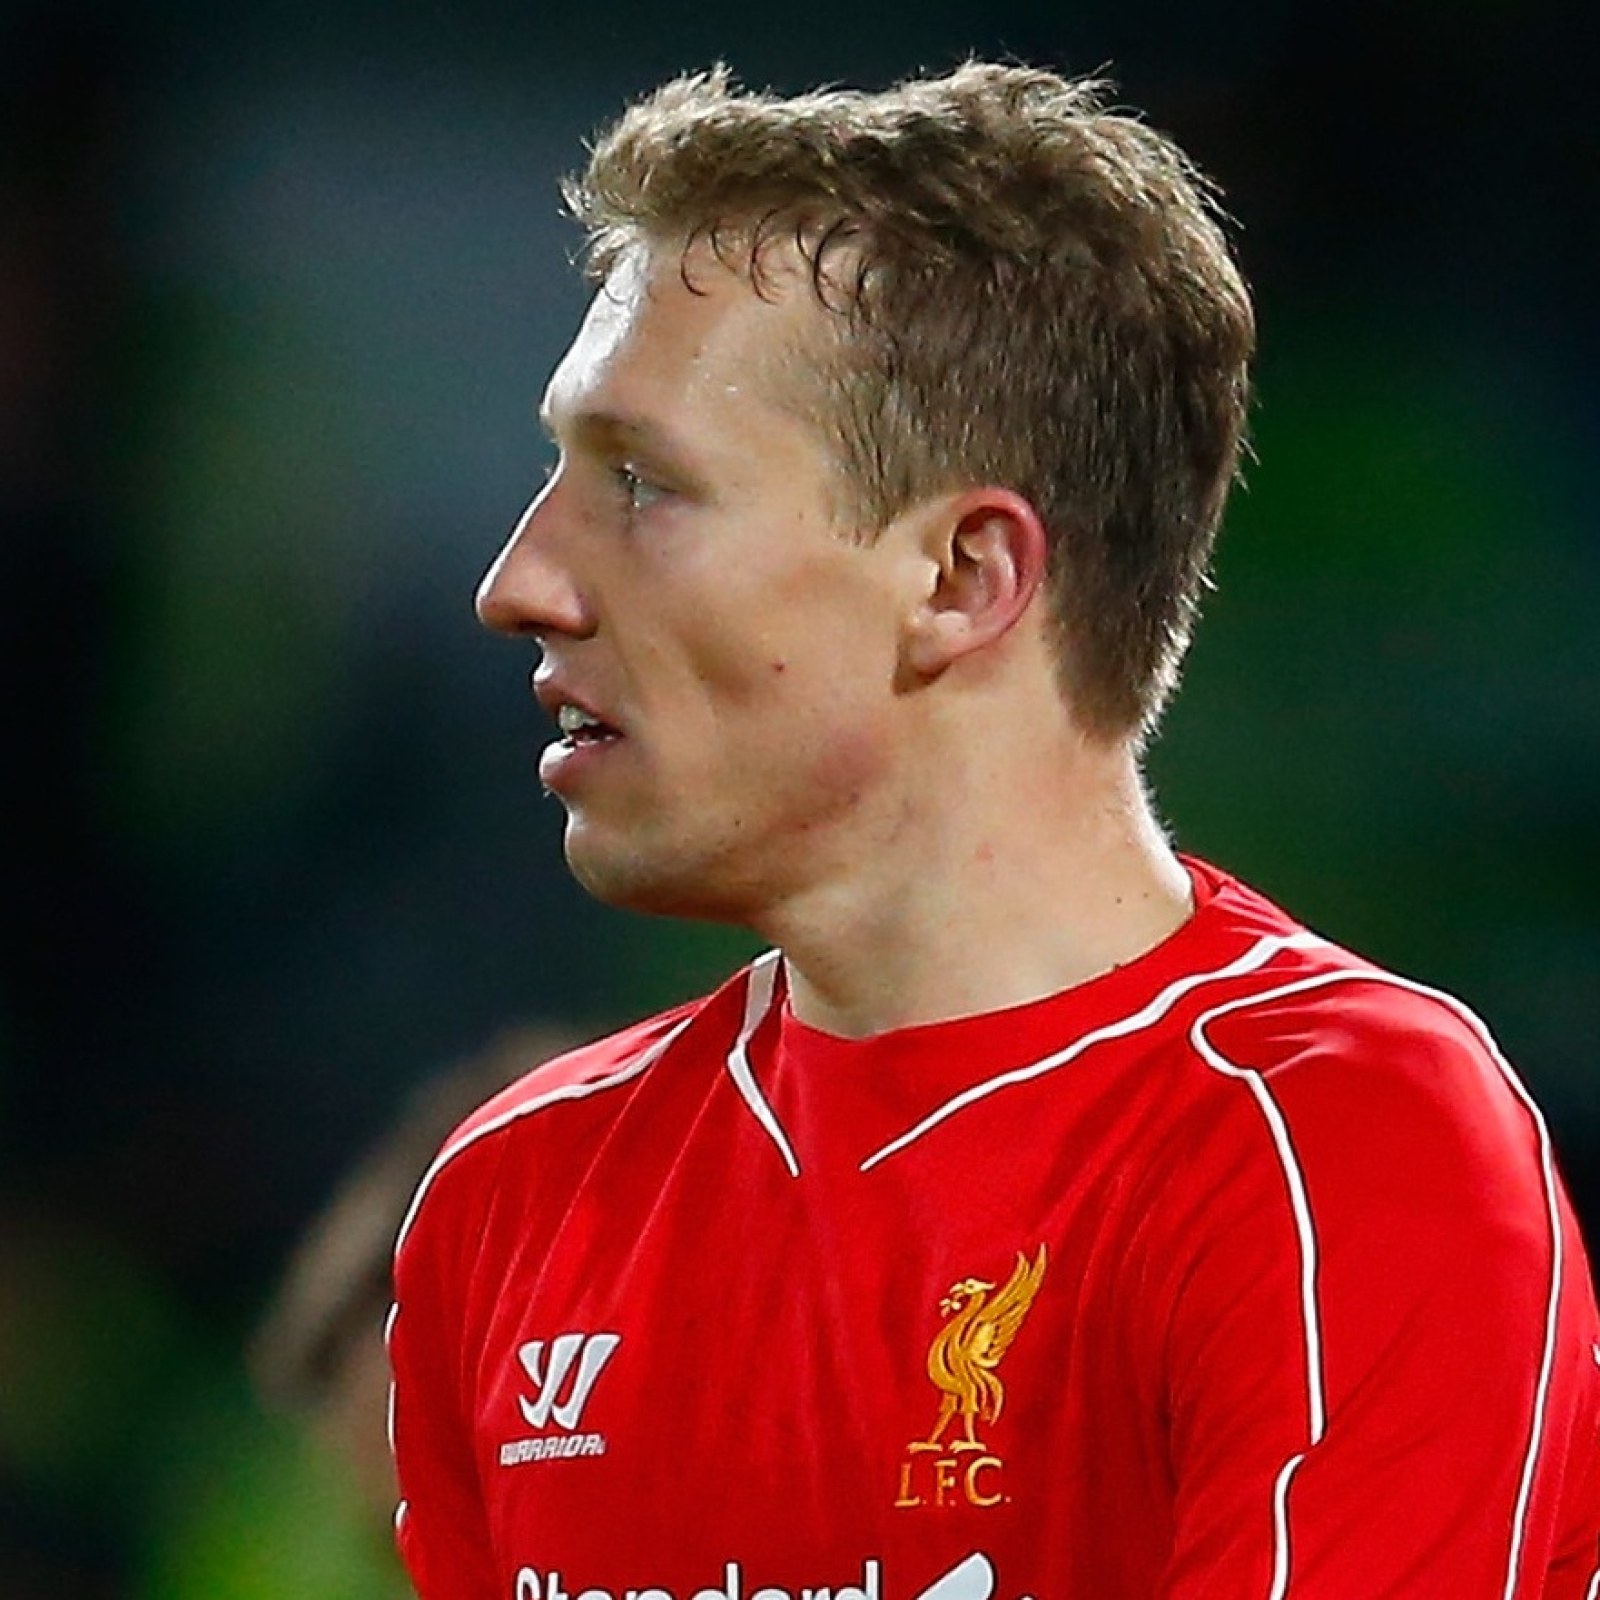 Lucas Leiva content with Liverpool stay after 'intense' transfer window